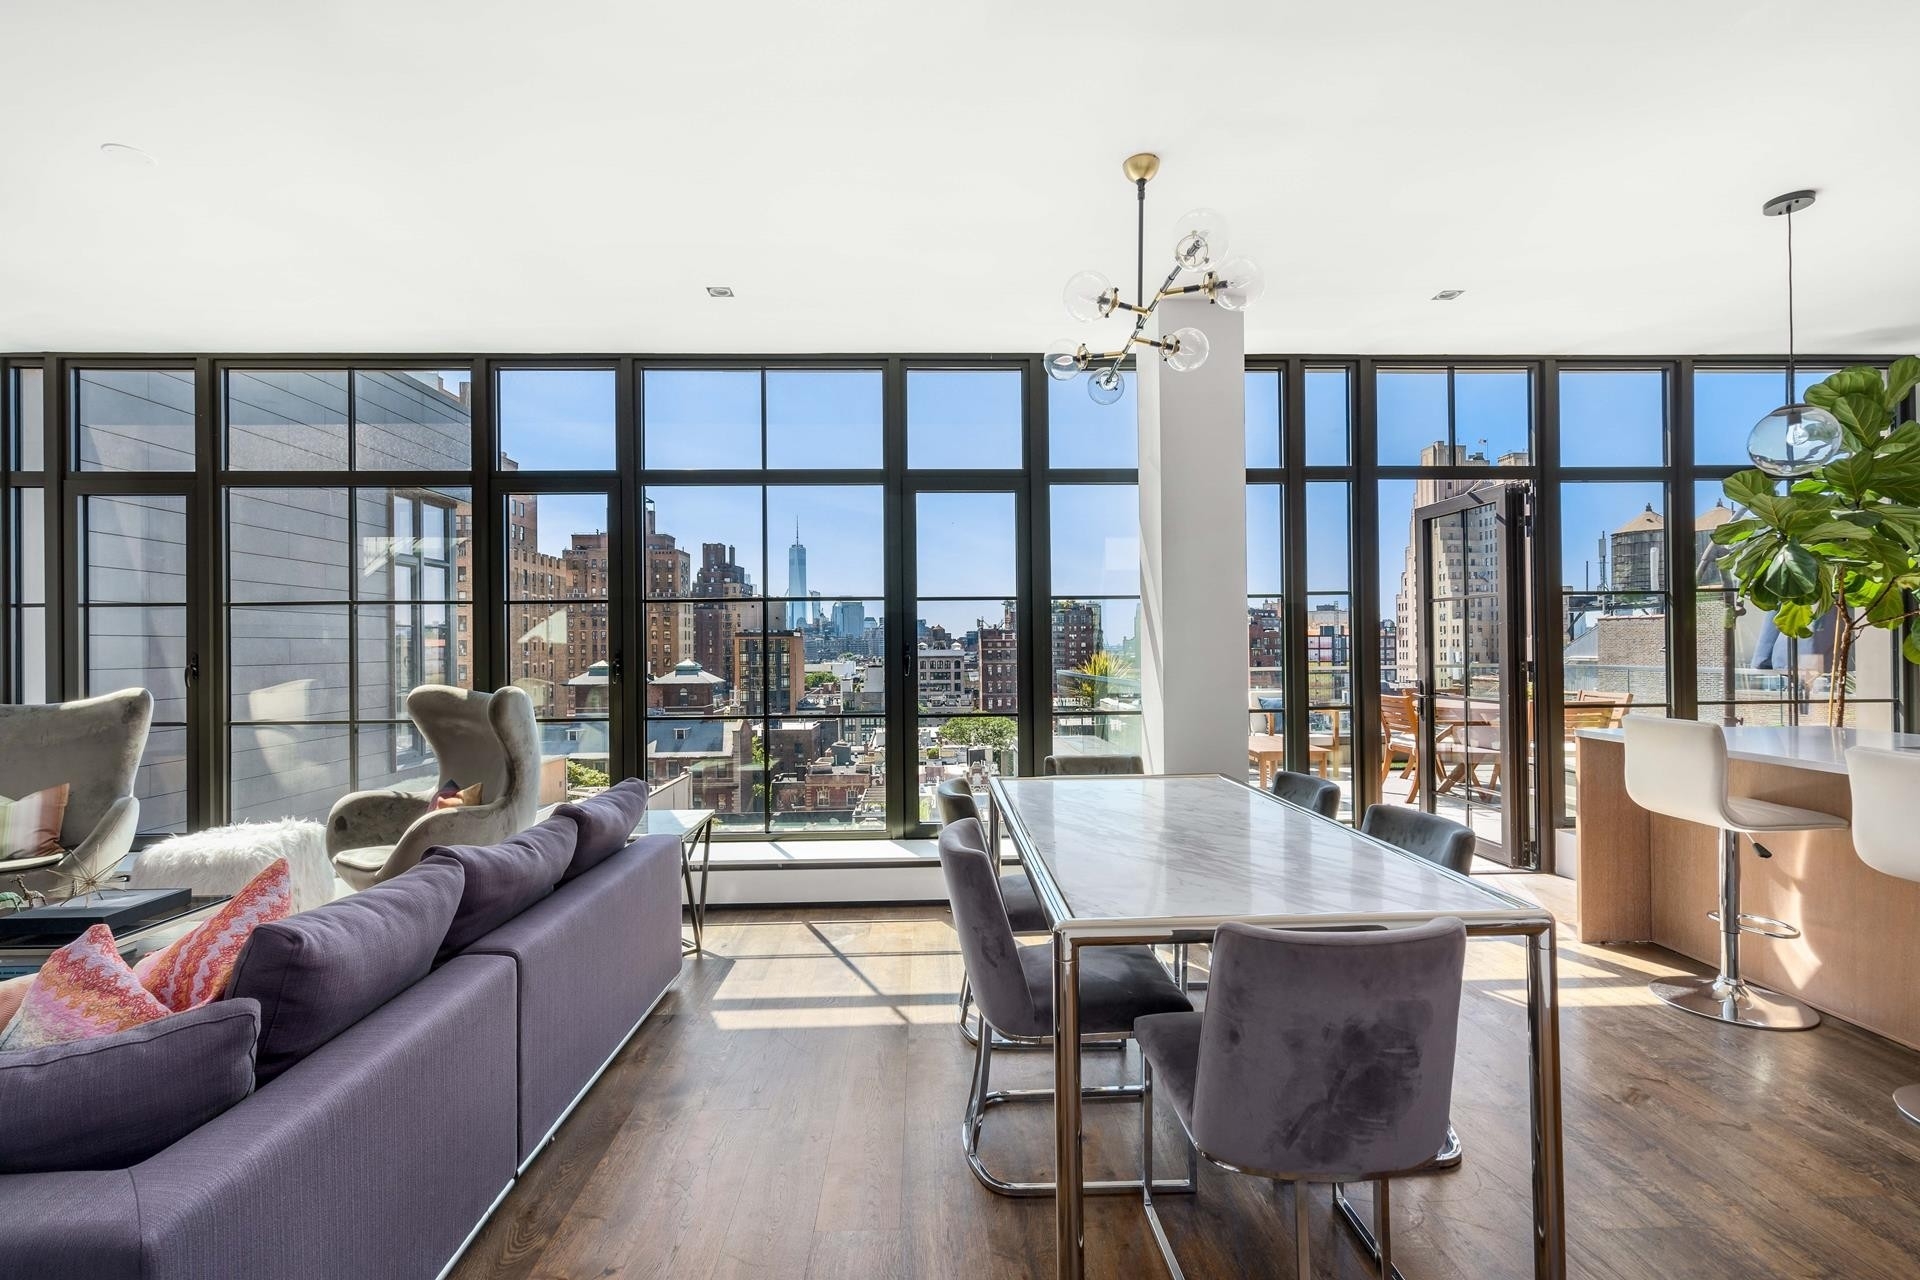 2. Condominiums for Sale at Dorian Chelsea, 225 W 17TH ST, PH Chelsea, New York, New York 10011